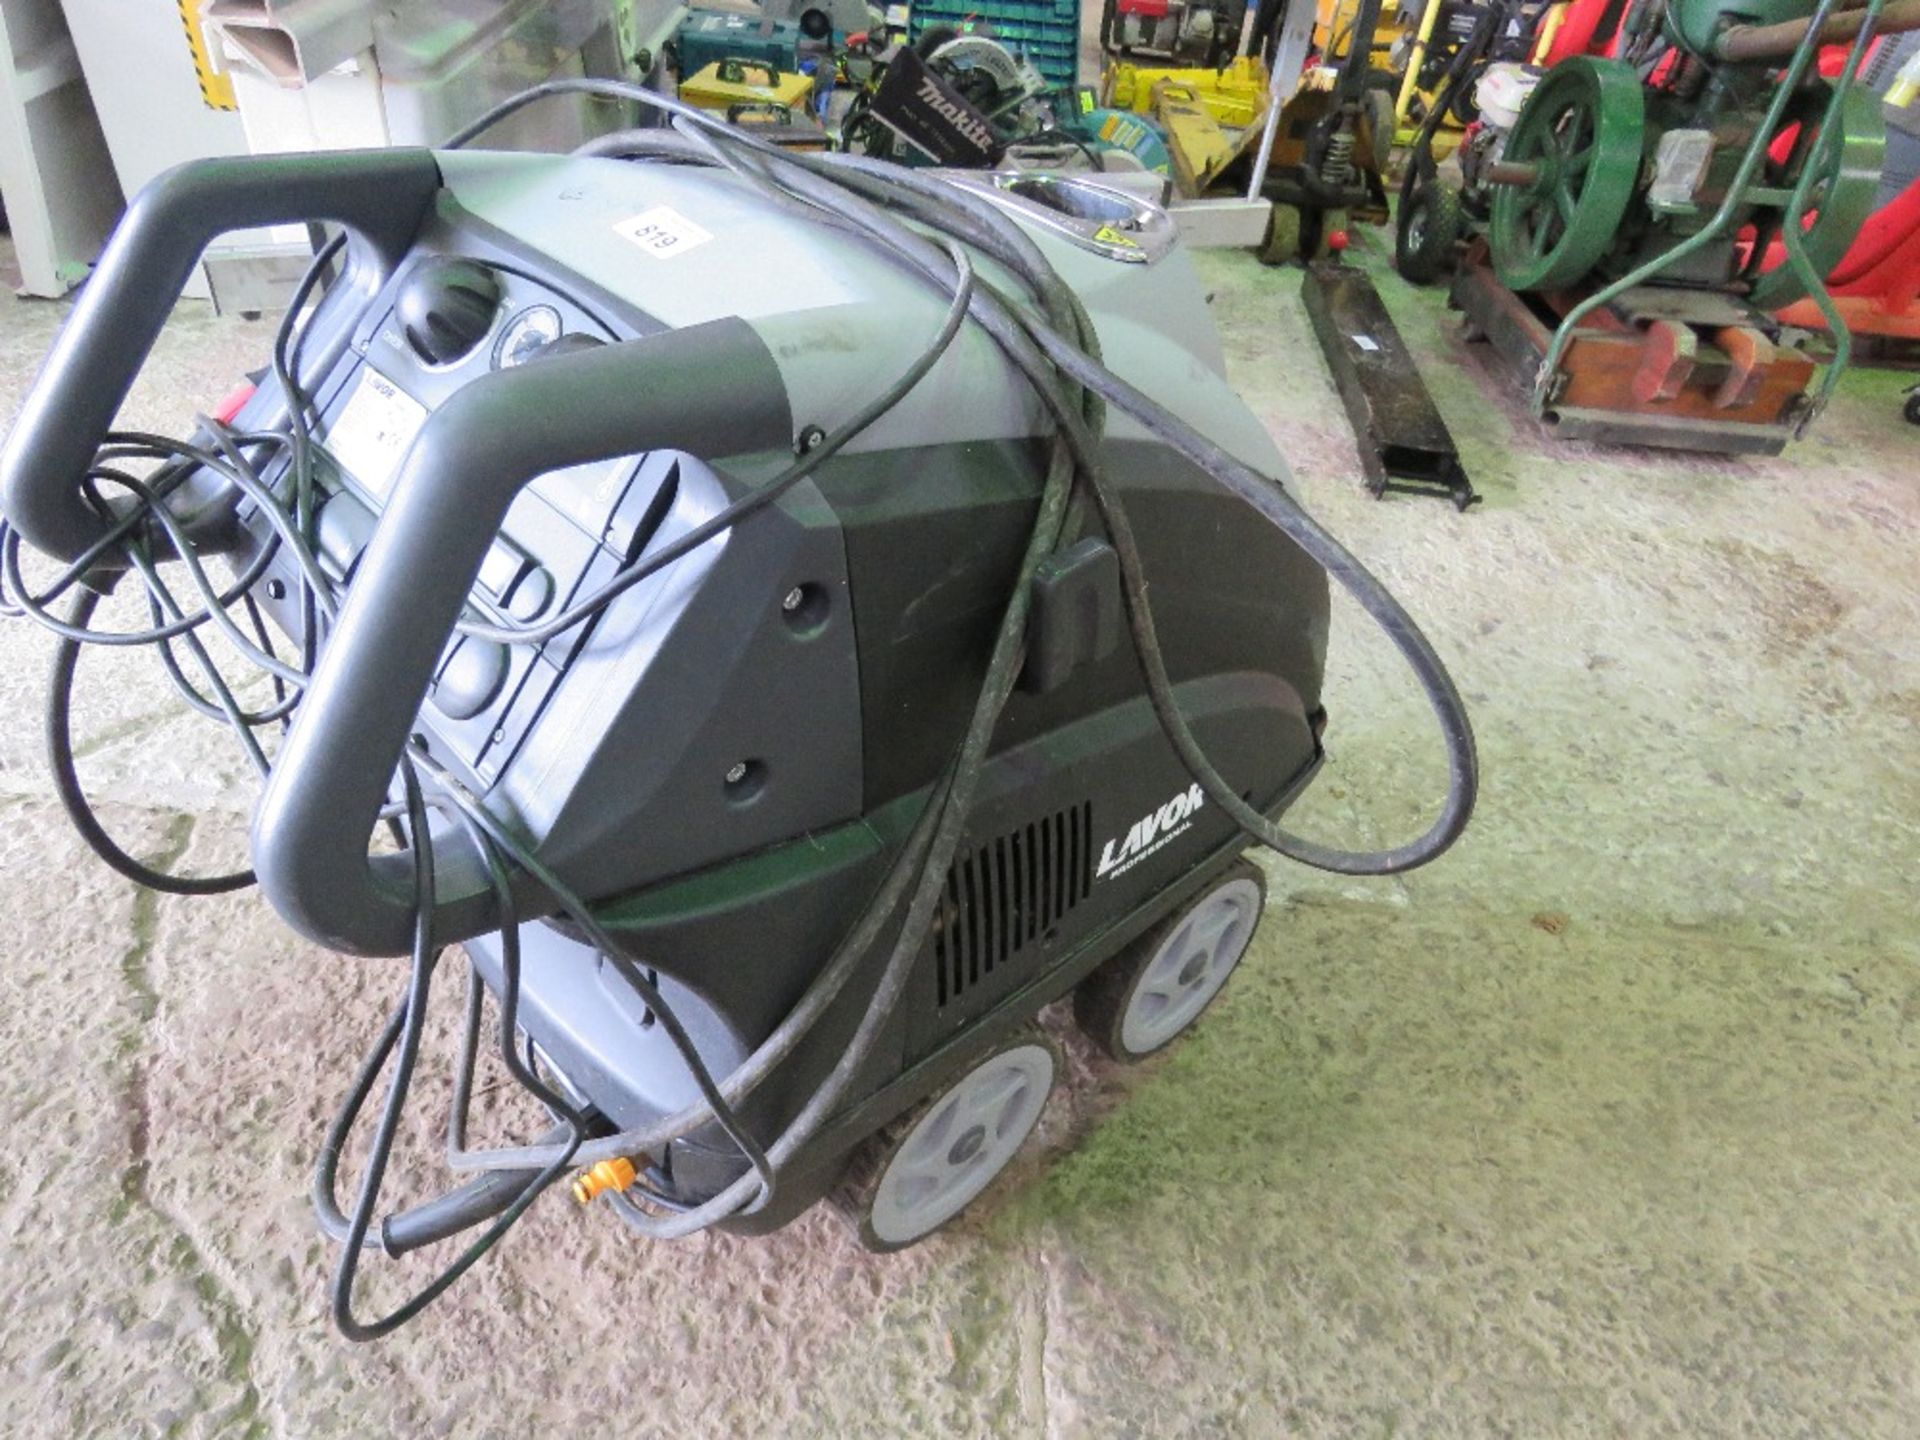 LAVOR 58KW PROFESSIONAL STEAM CLEANER, 240 VOLT, LITTLE USED SINCE PURCHASE IN SEPTEMBER 2021. WITH - Image 2 of 6